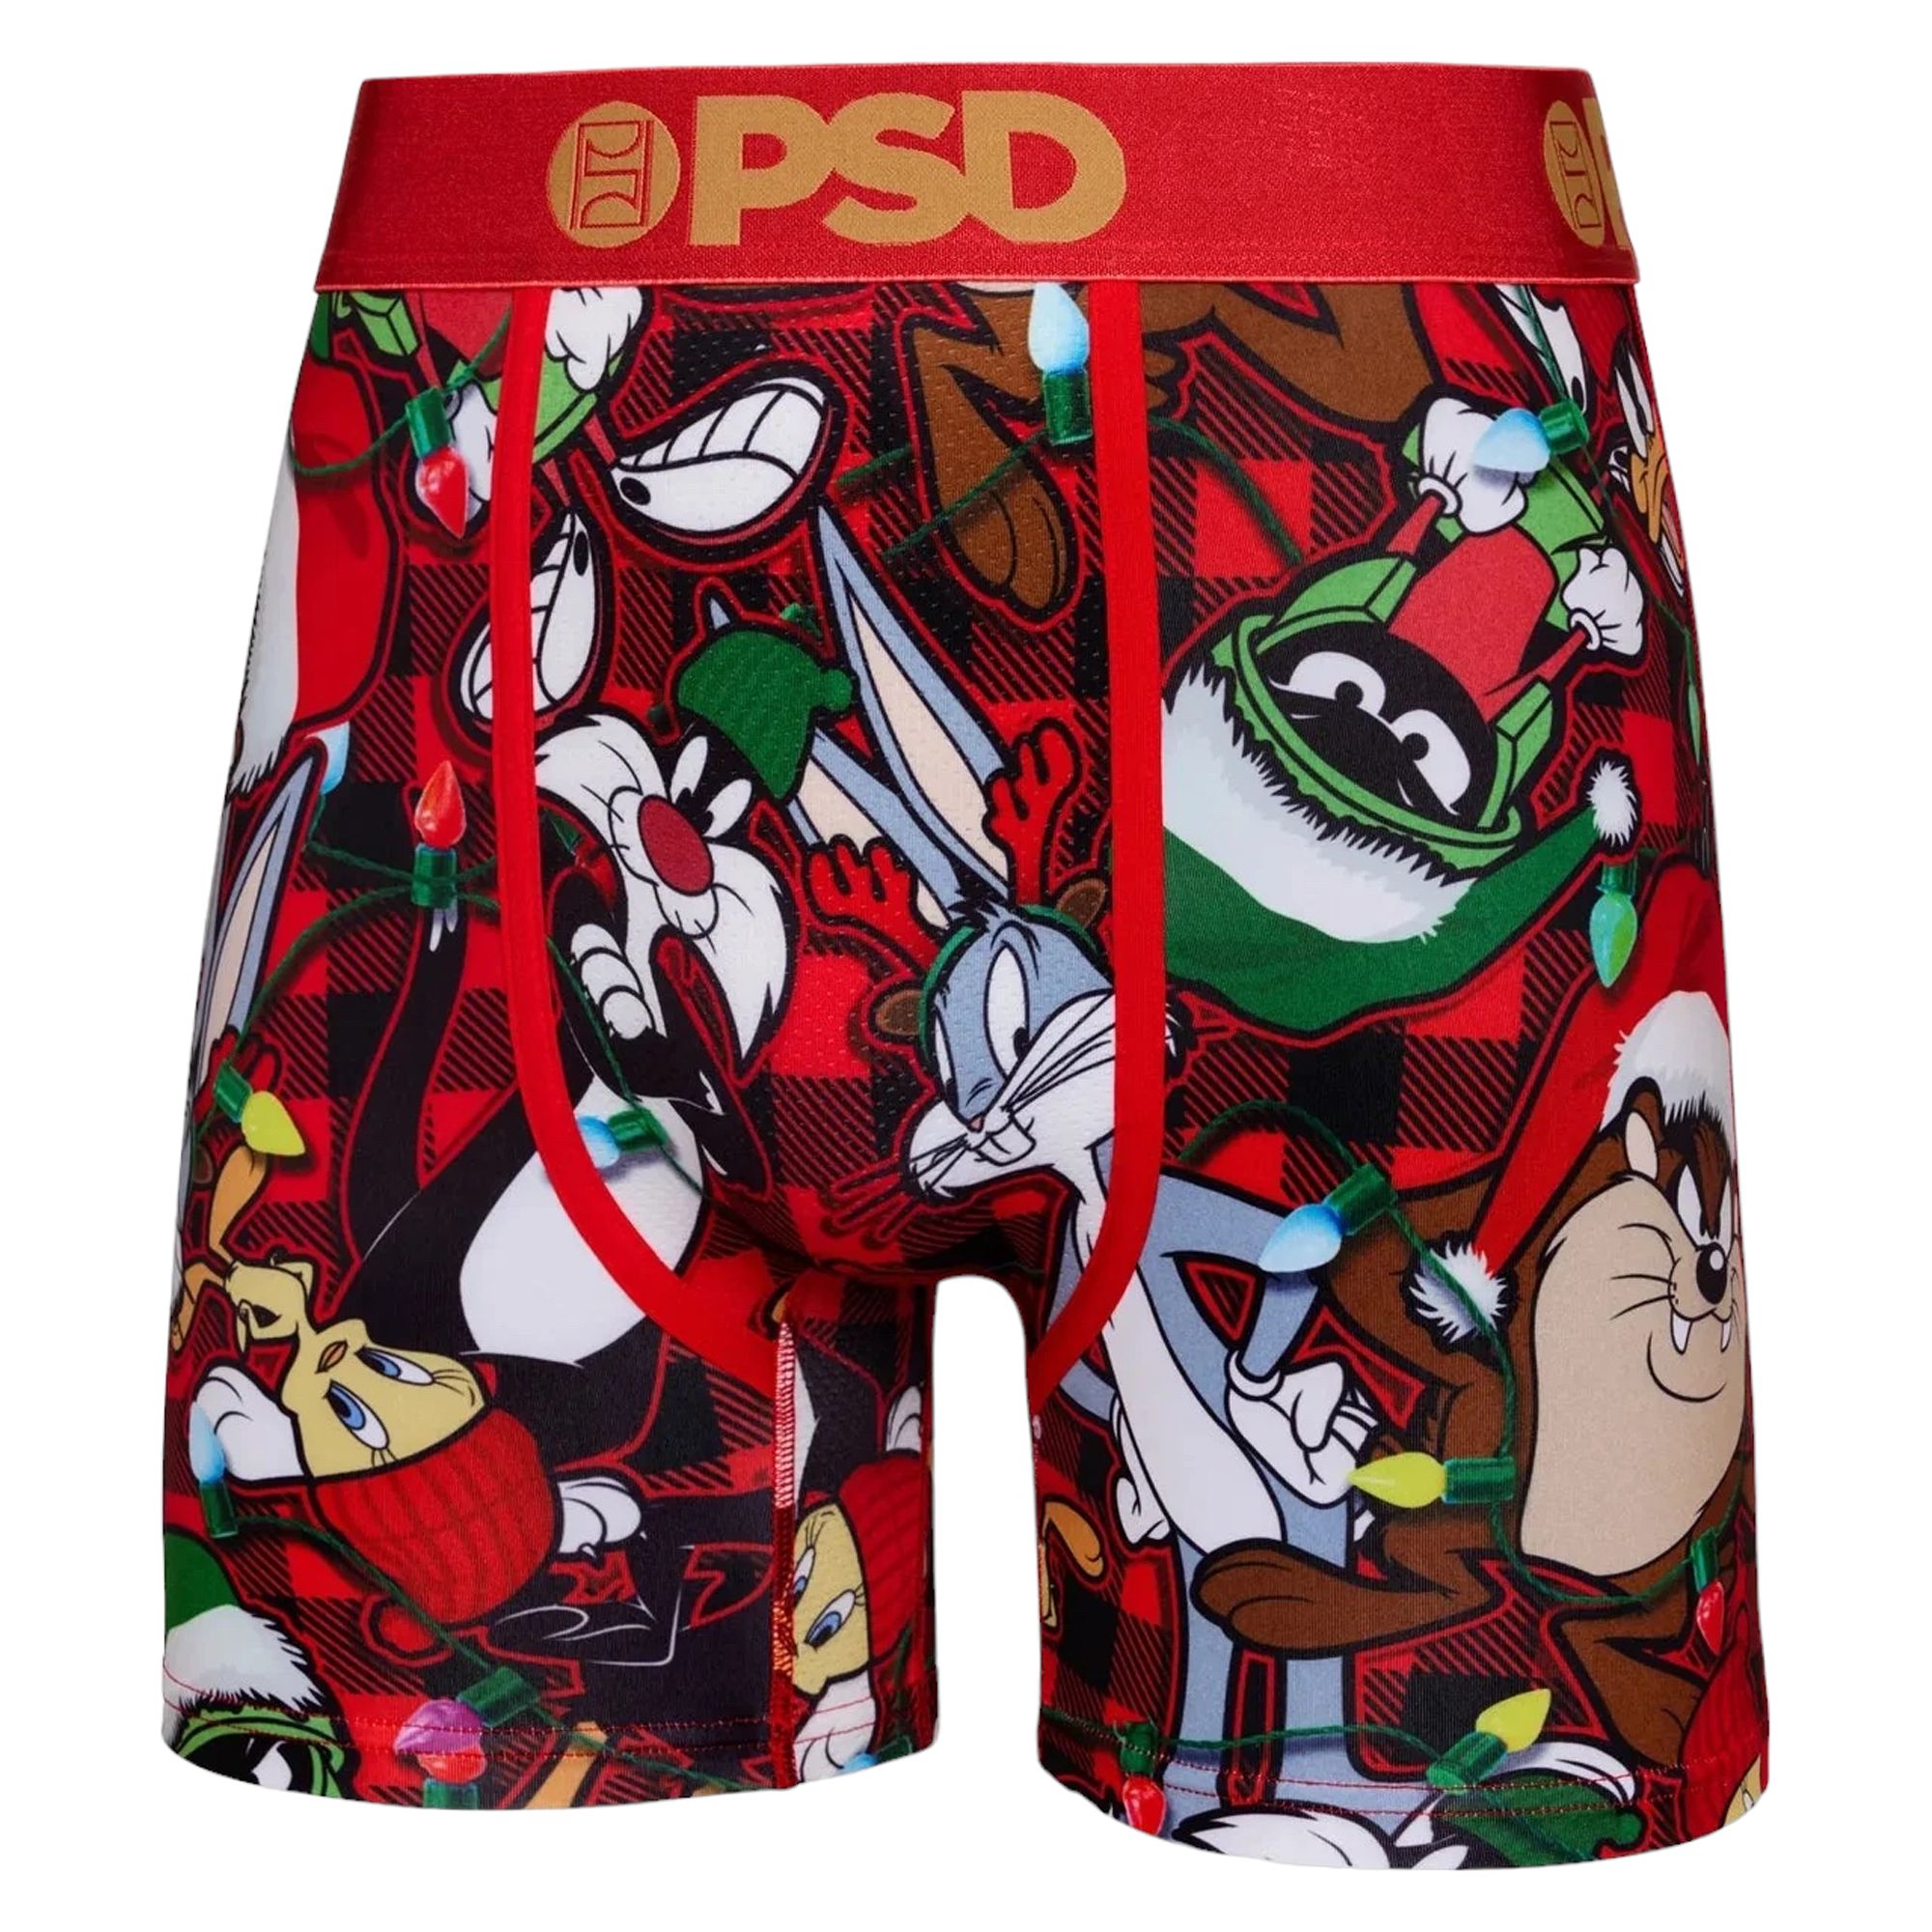  PSD Women's Berry Special Boy Shorts, Multi, L : Clothing,  Shoes & Jewelry